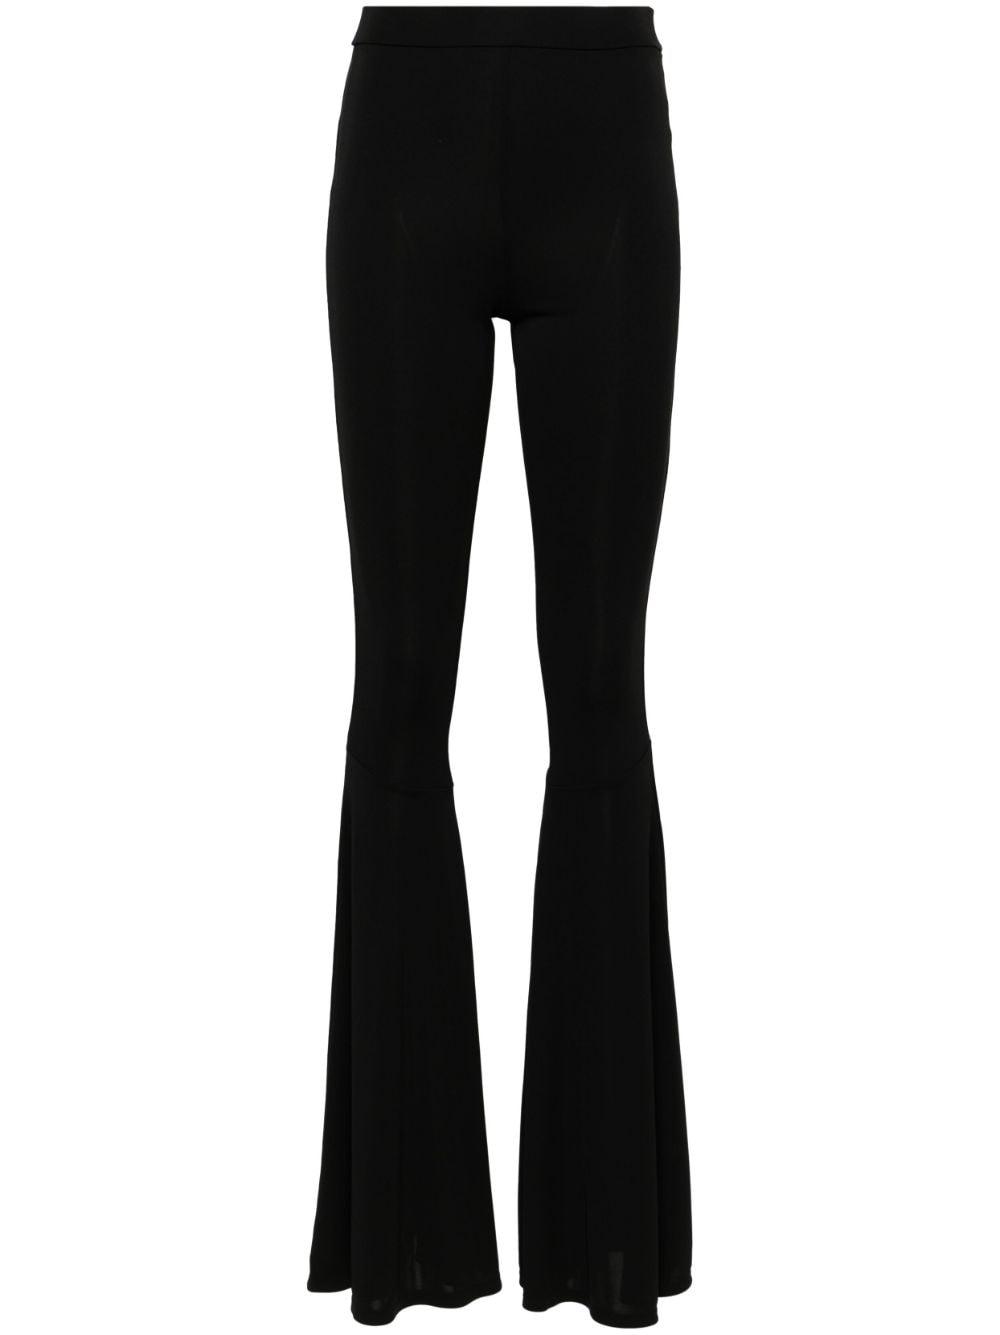 flared jersey trousers - Black